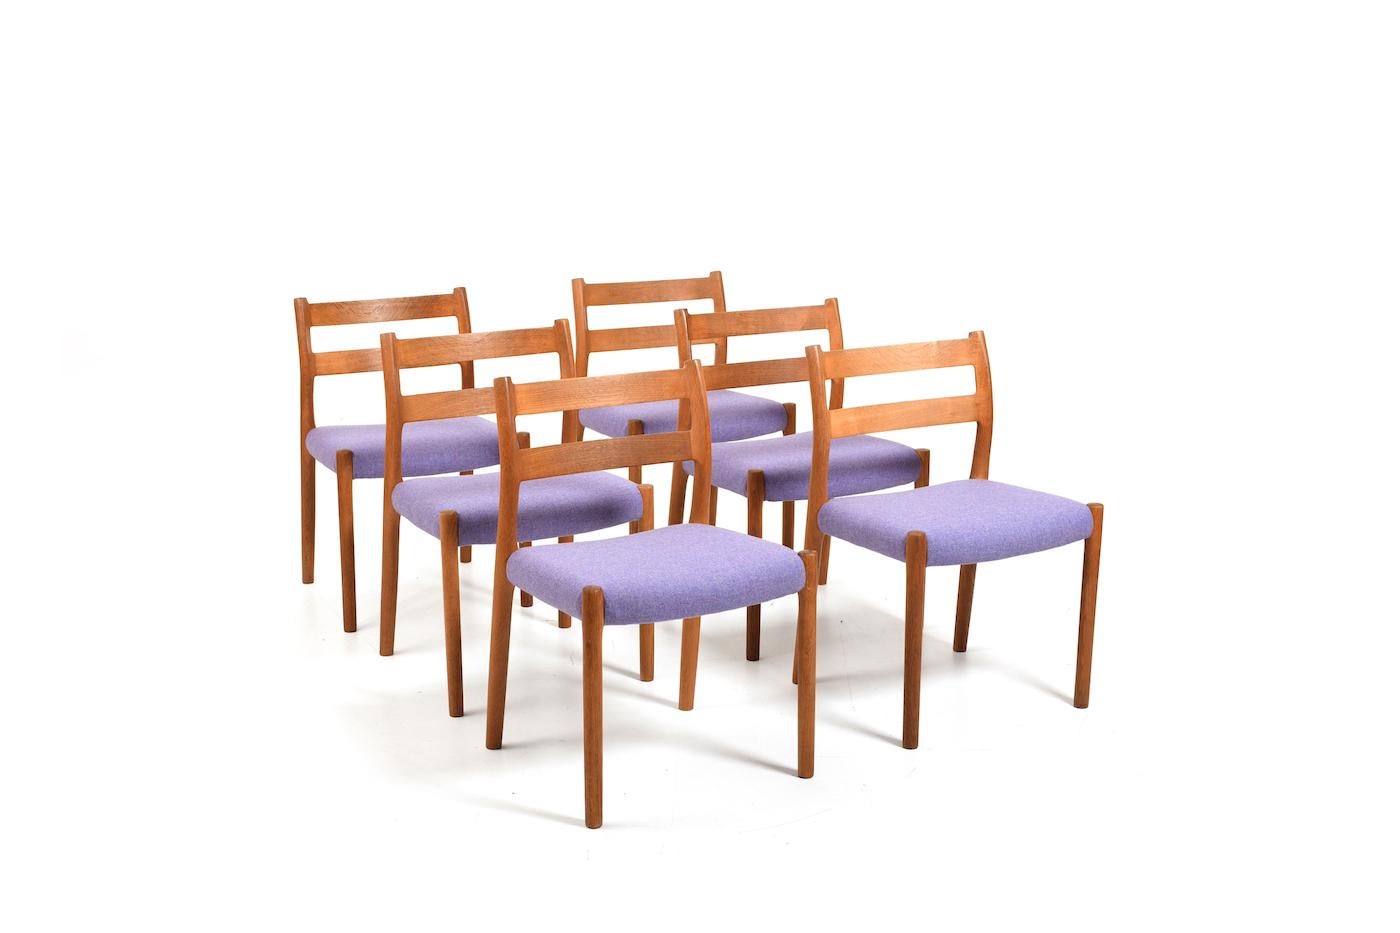 Niels O. Møller dining chairs in solid oak. New upholstered with purple Kvadrat fabric by Nanna Ditzel series. Model no. 84. Produced in 1960s by J.L. Møller‘s Møbelfabrik. Wood cleaned and oiled. In very good vintage condition. Normal signs of age